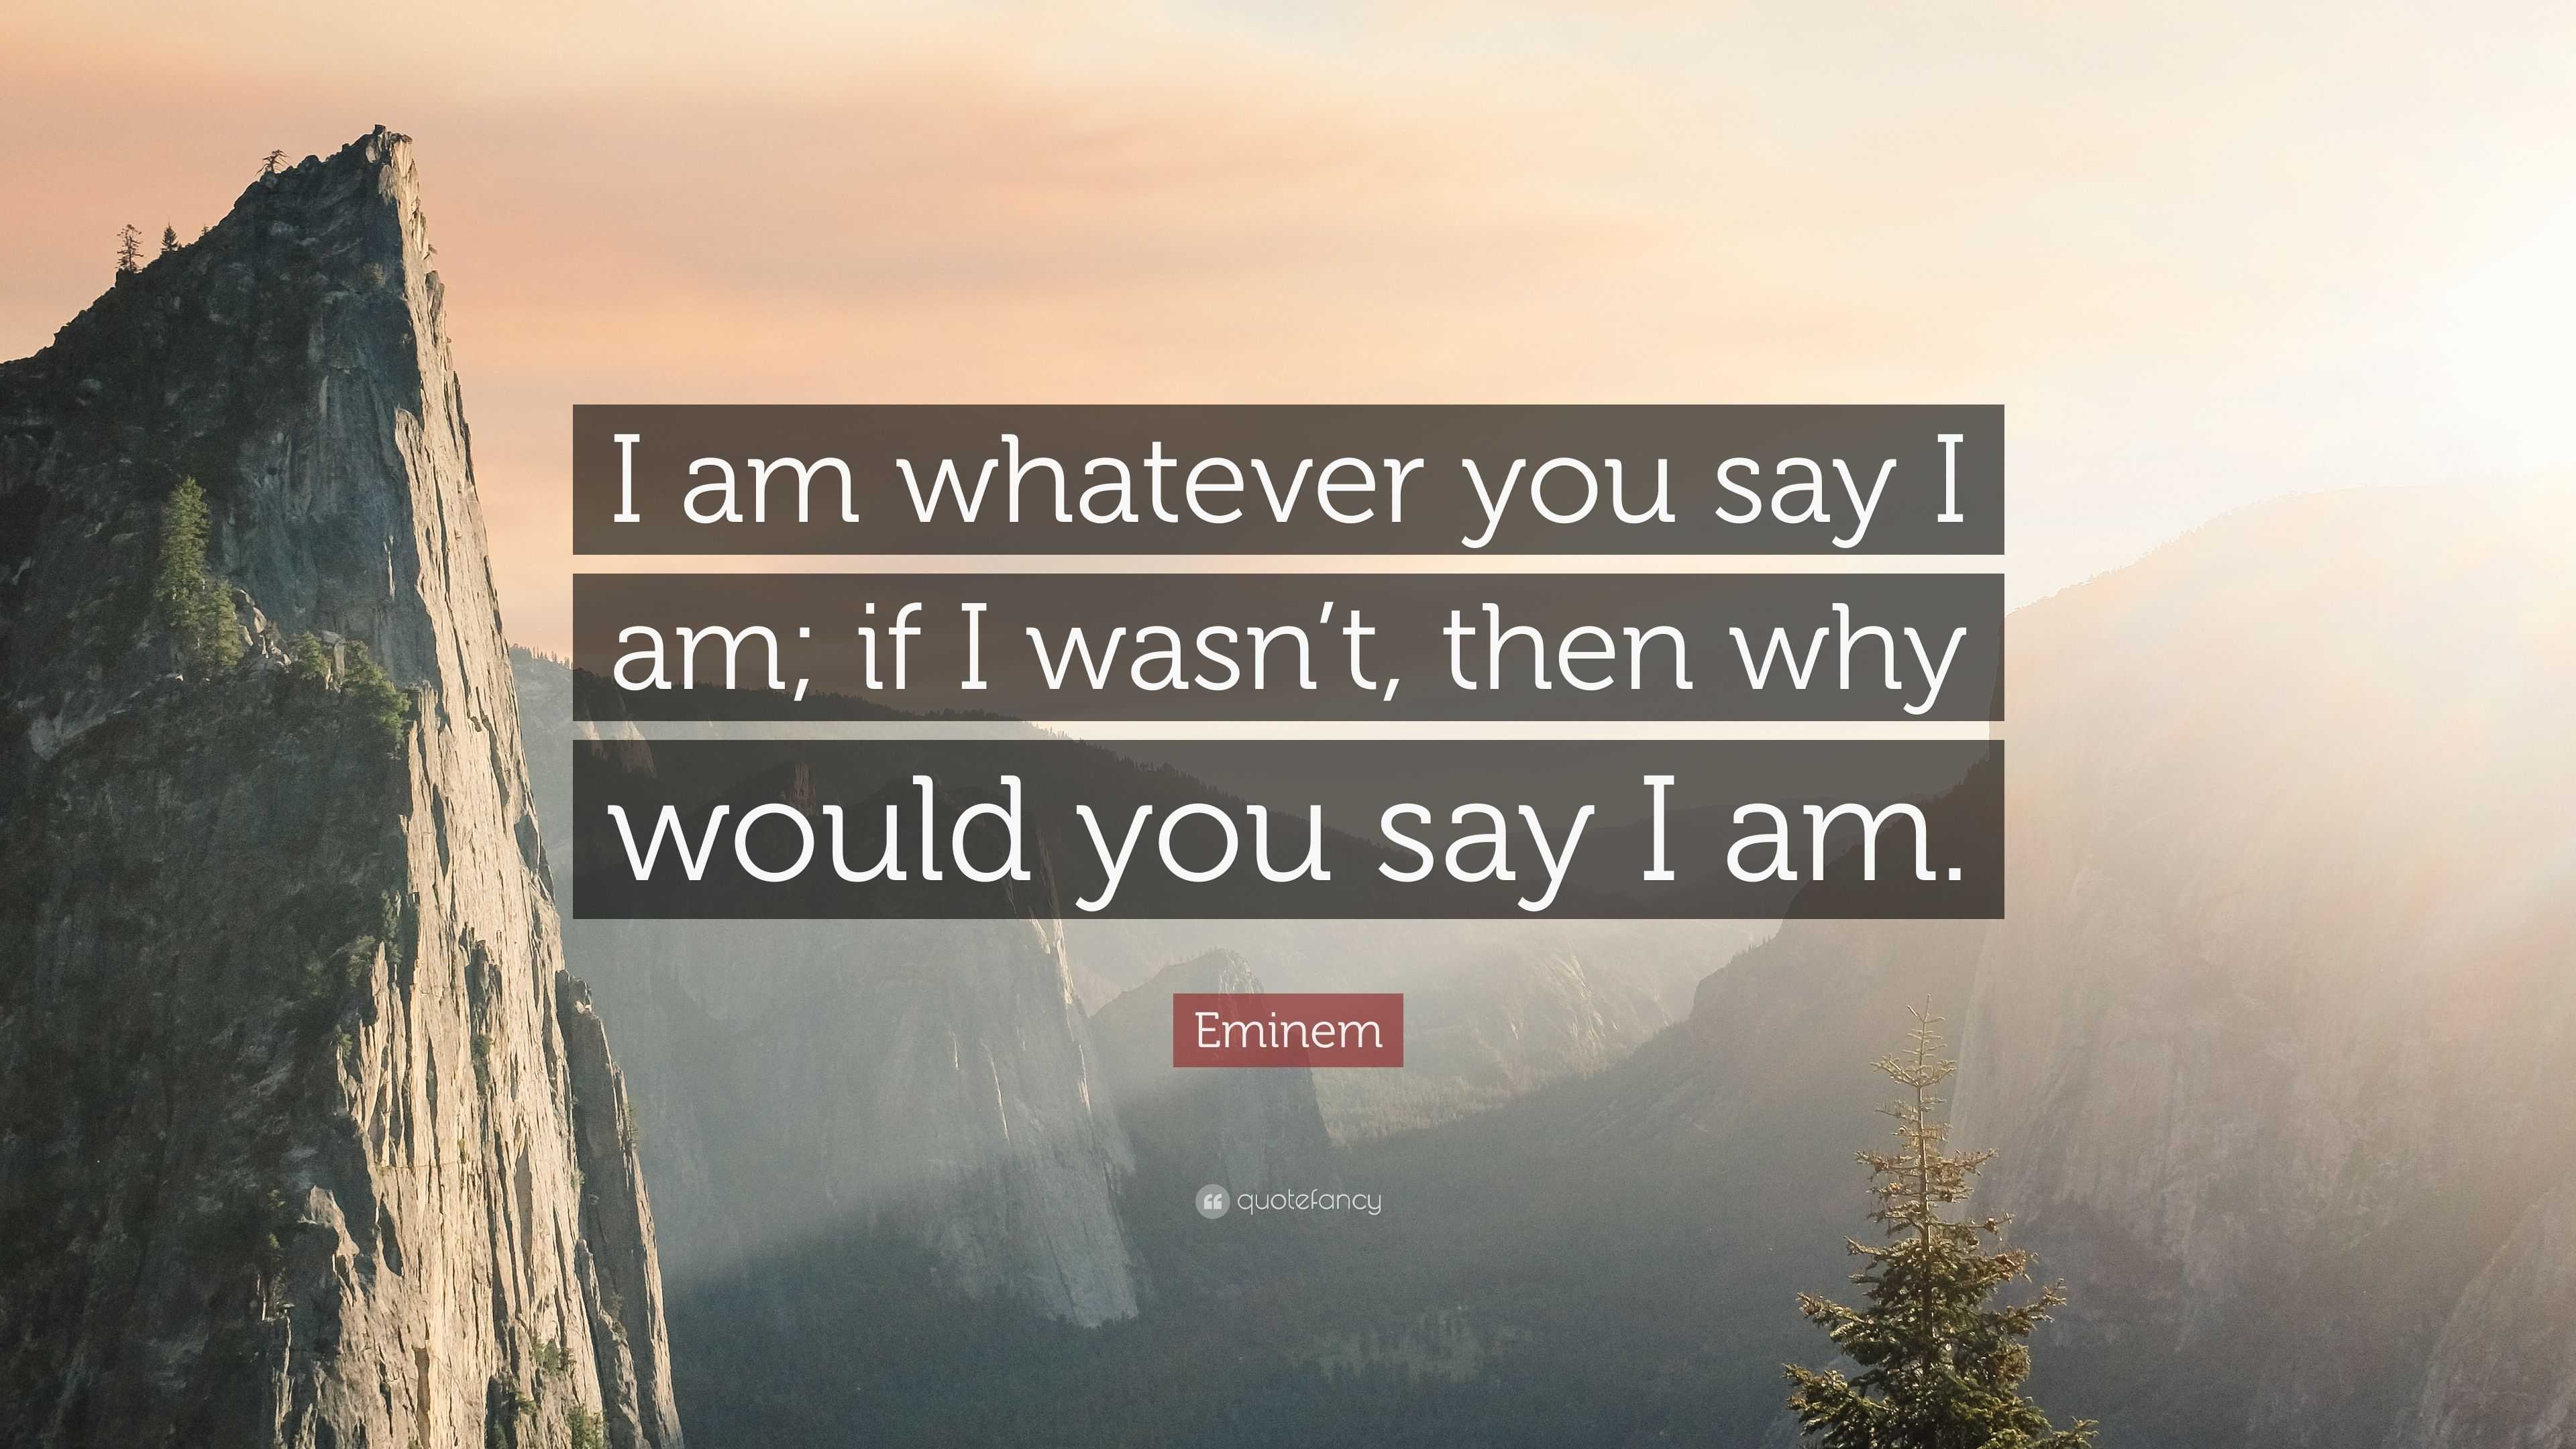 Eminem Quote: “I am whatever you say I am; if I wasn’t, then why would ...